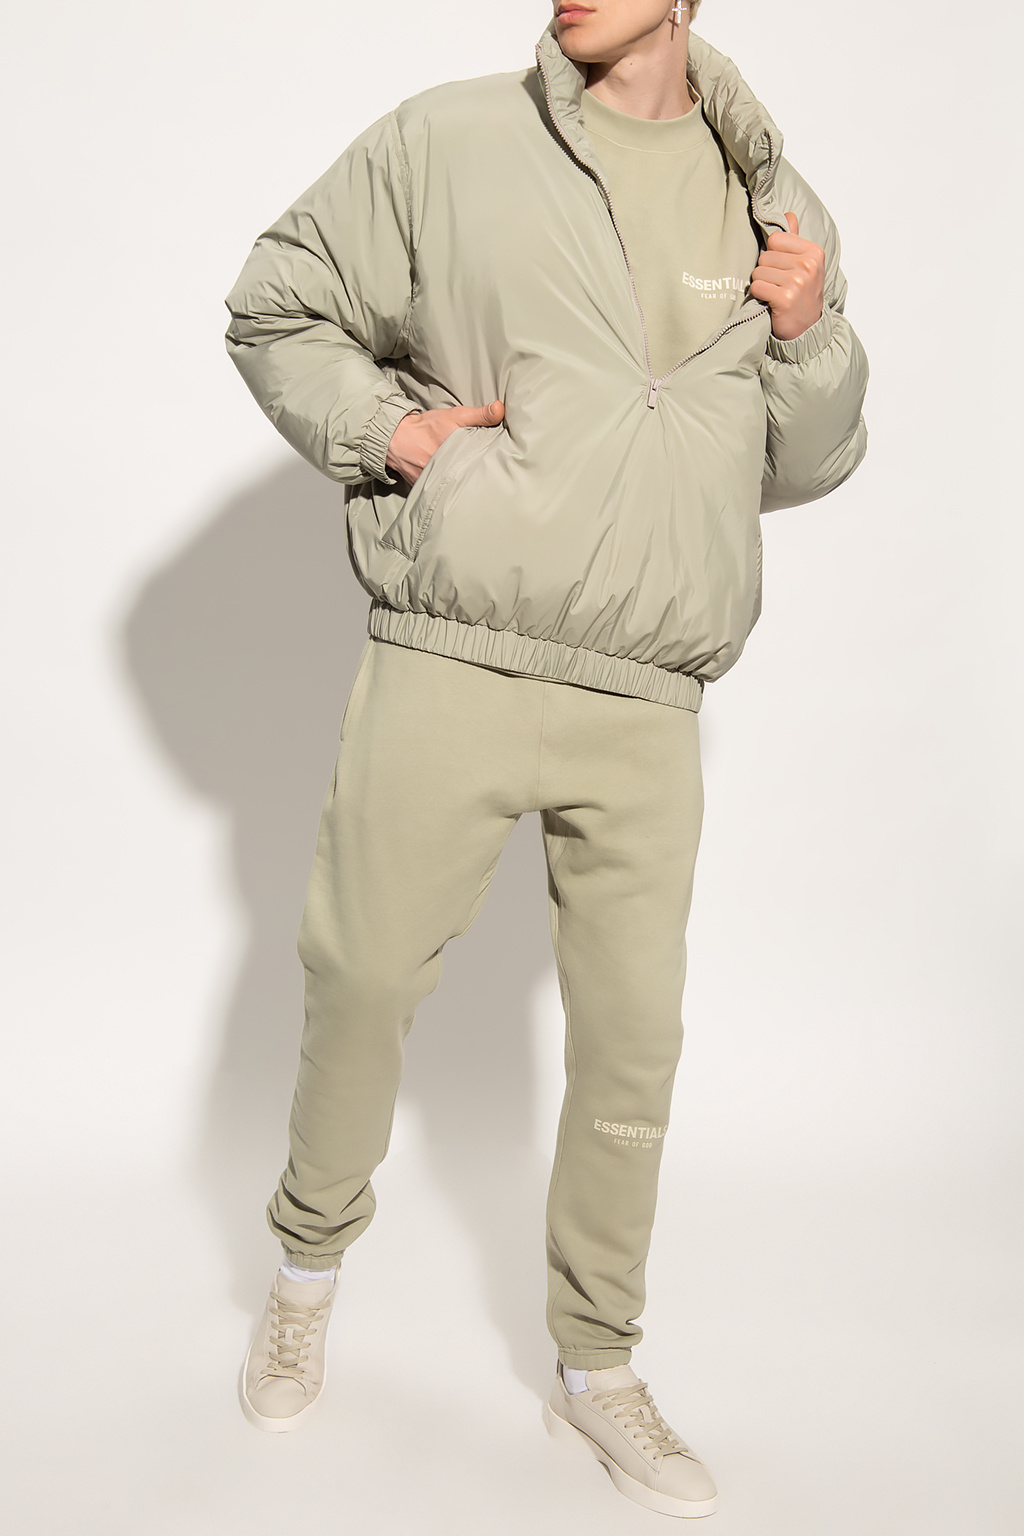 FEAR OF GOD ESSENTIALS QUILTED Sea Foam24時間以内発送